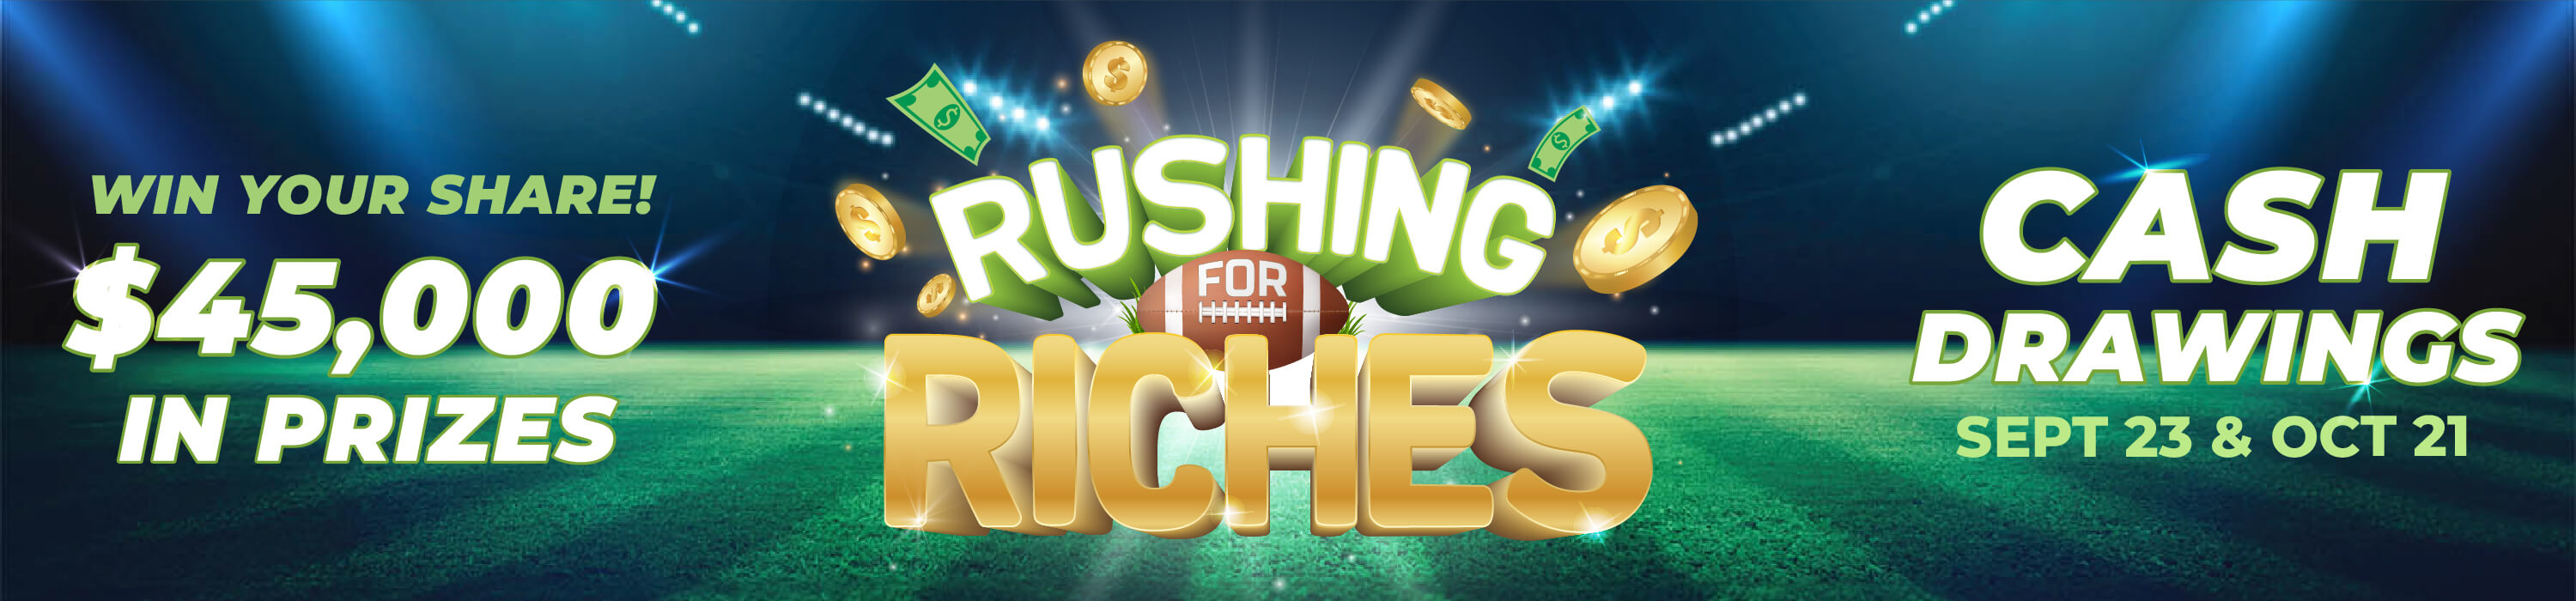 Rushing for Riches - Win your Share - $45,000 in prizes Cash drawings Sept 23 & Oct 21